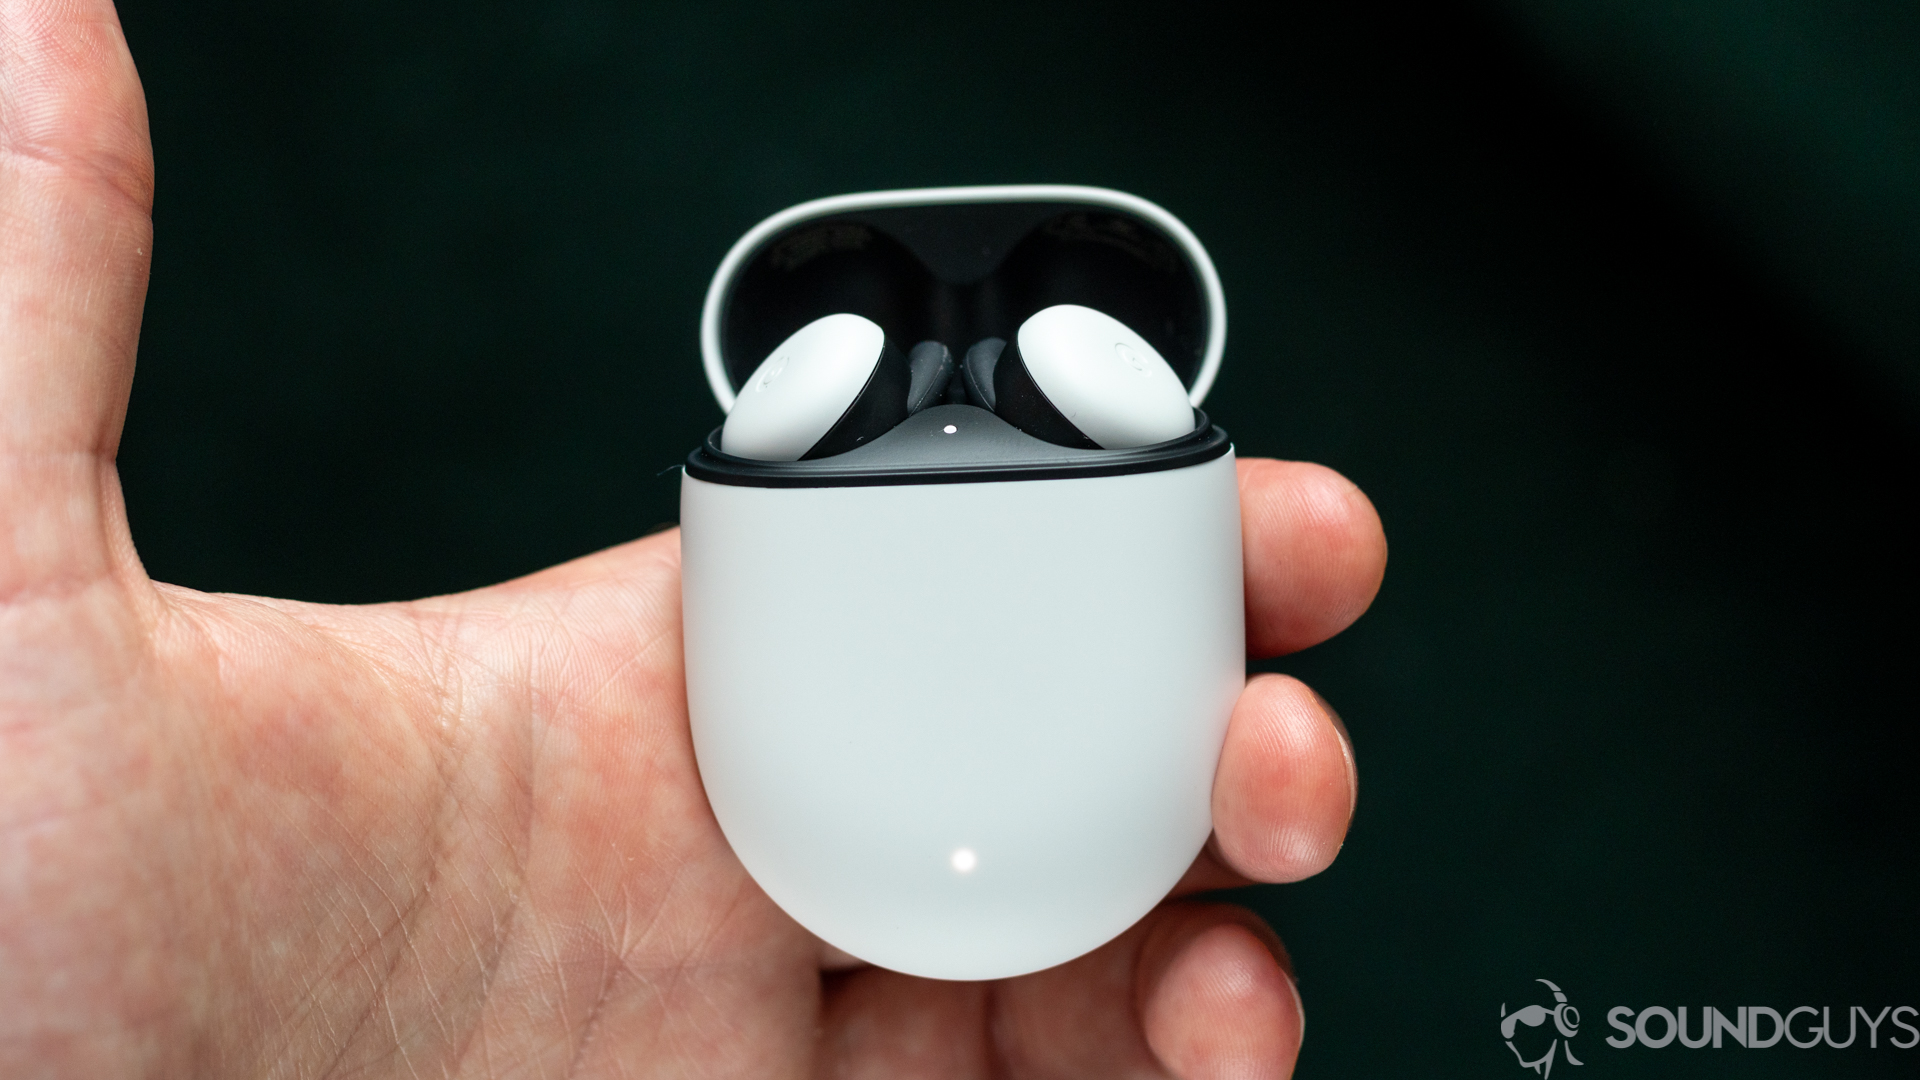 A hand holds the Google Pixel Buds 2020 true wireless earbuds case open to reveal the earbud.